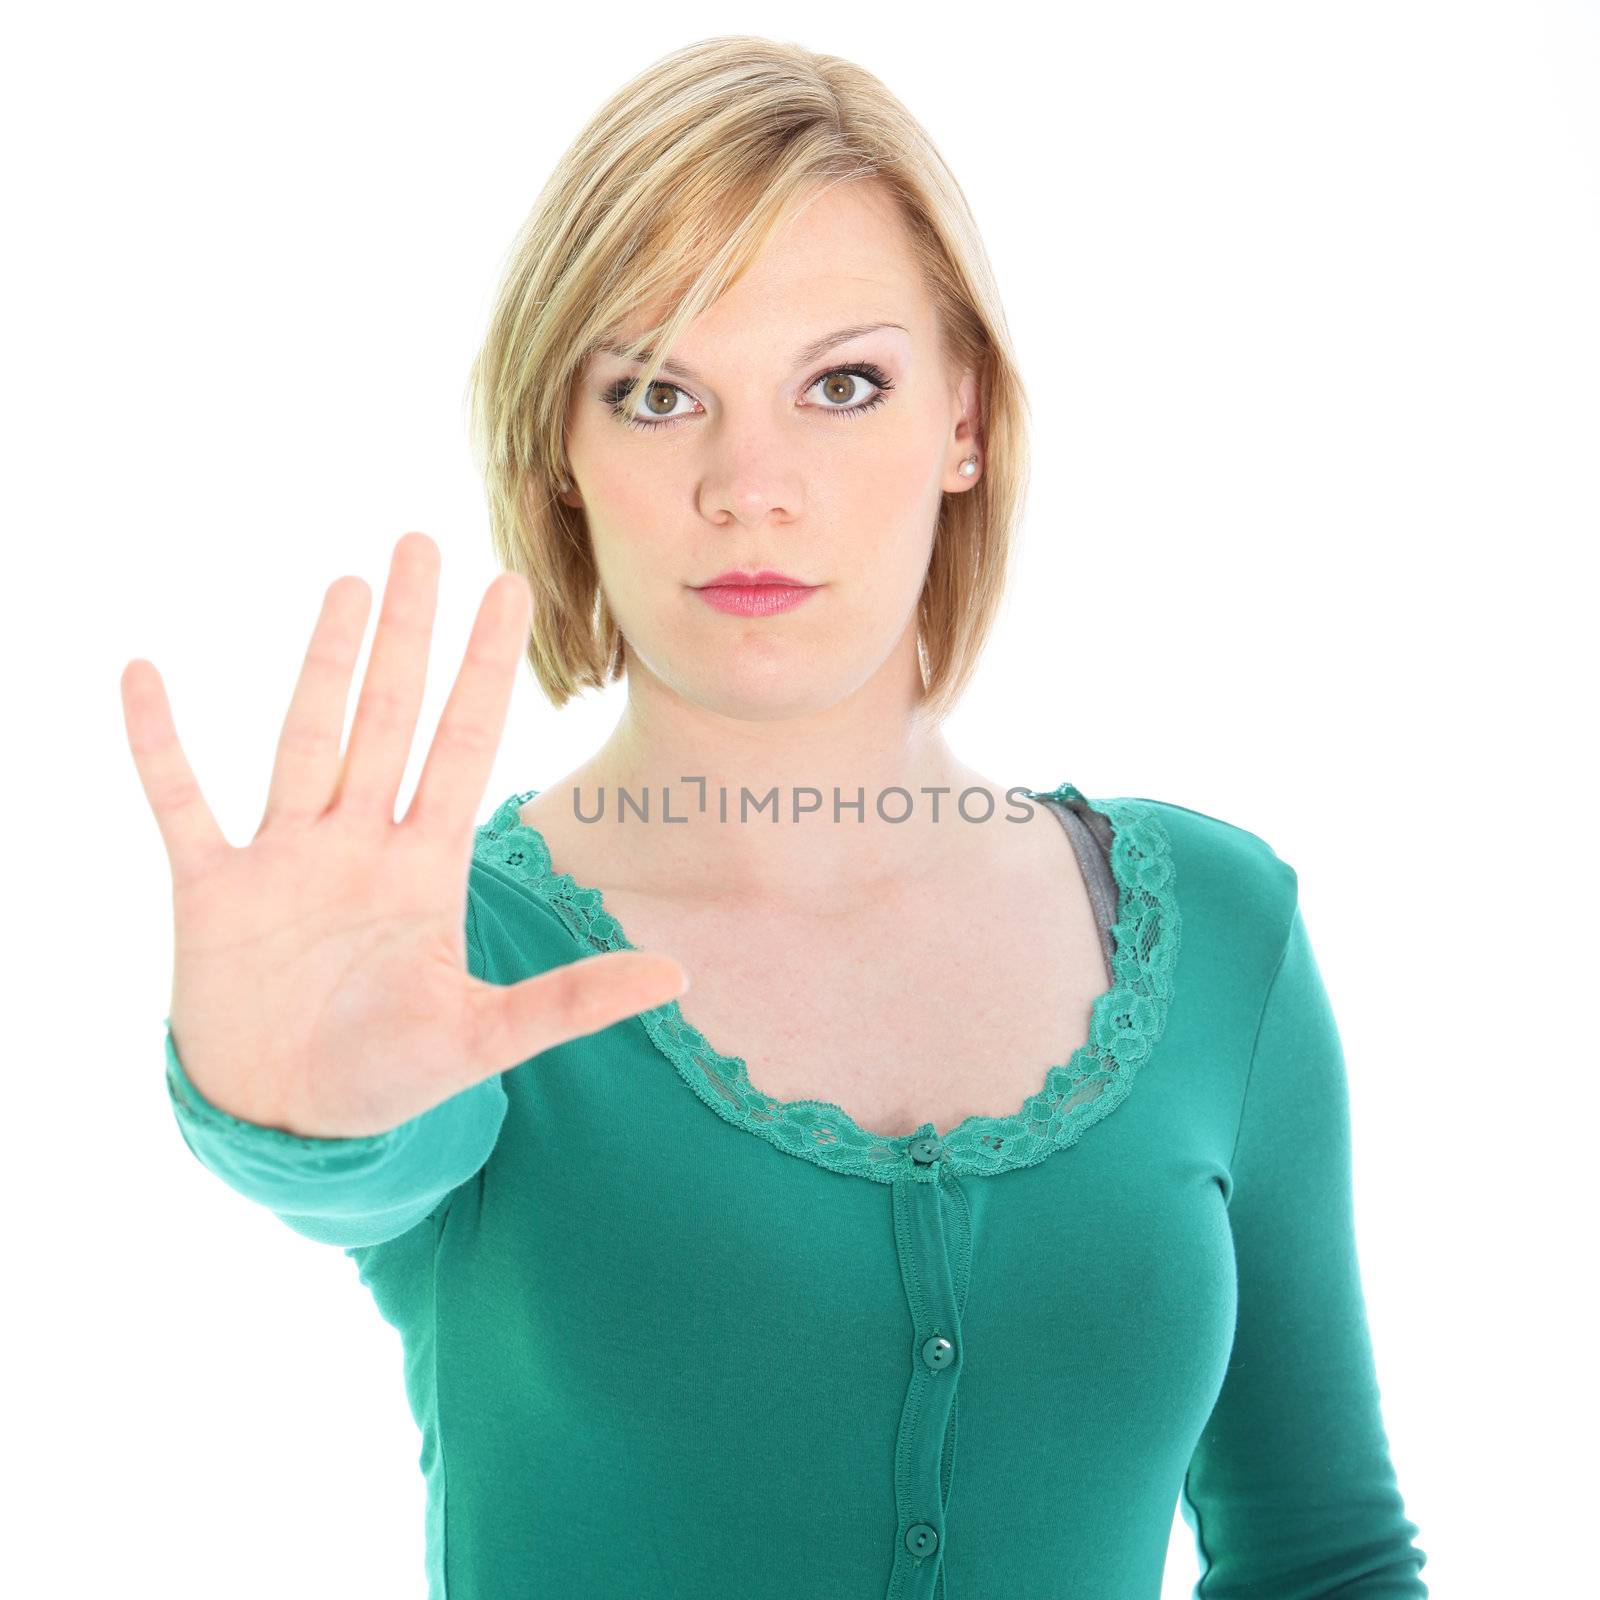 Resolute woman with a determined expression calling a halt with her hand holding it at arms length with fingers splayed isolated on white